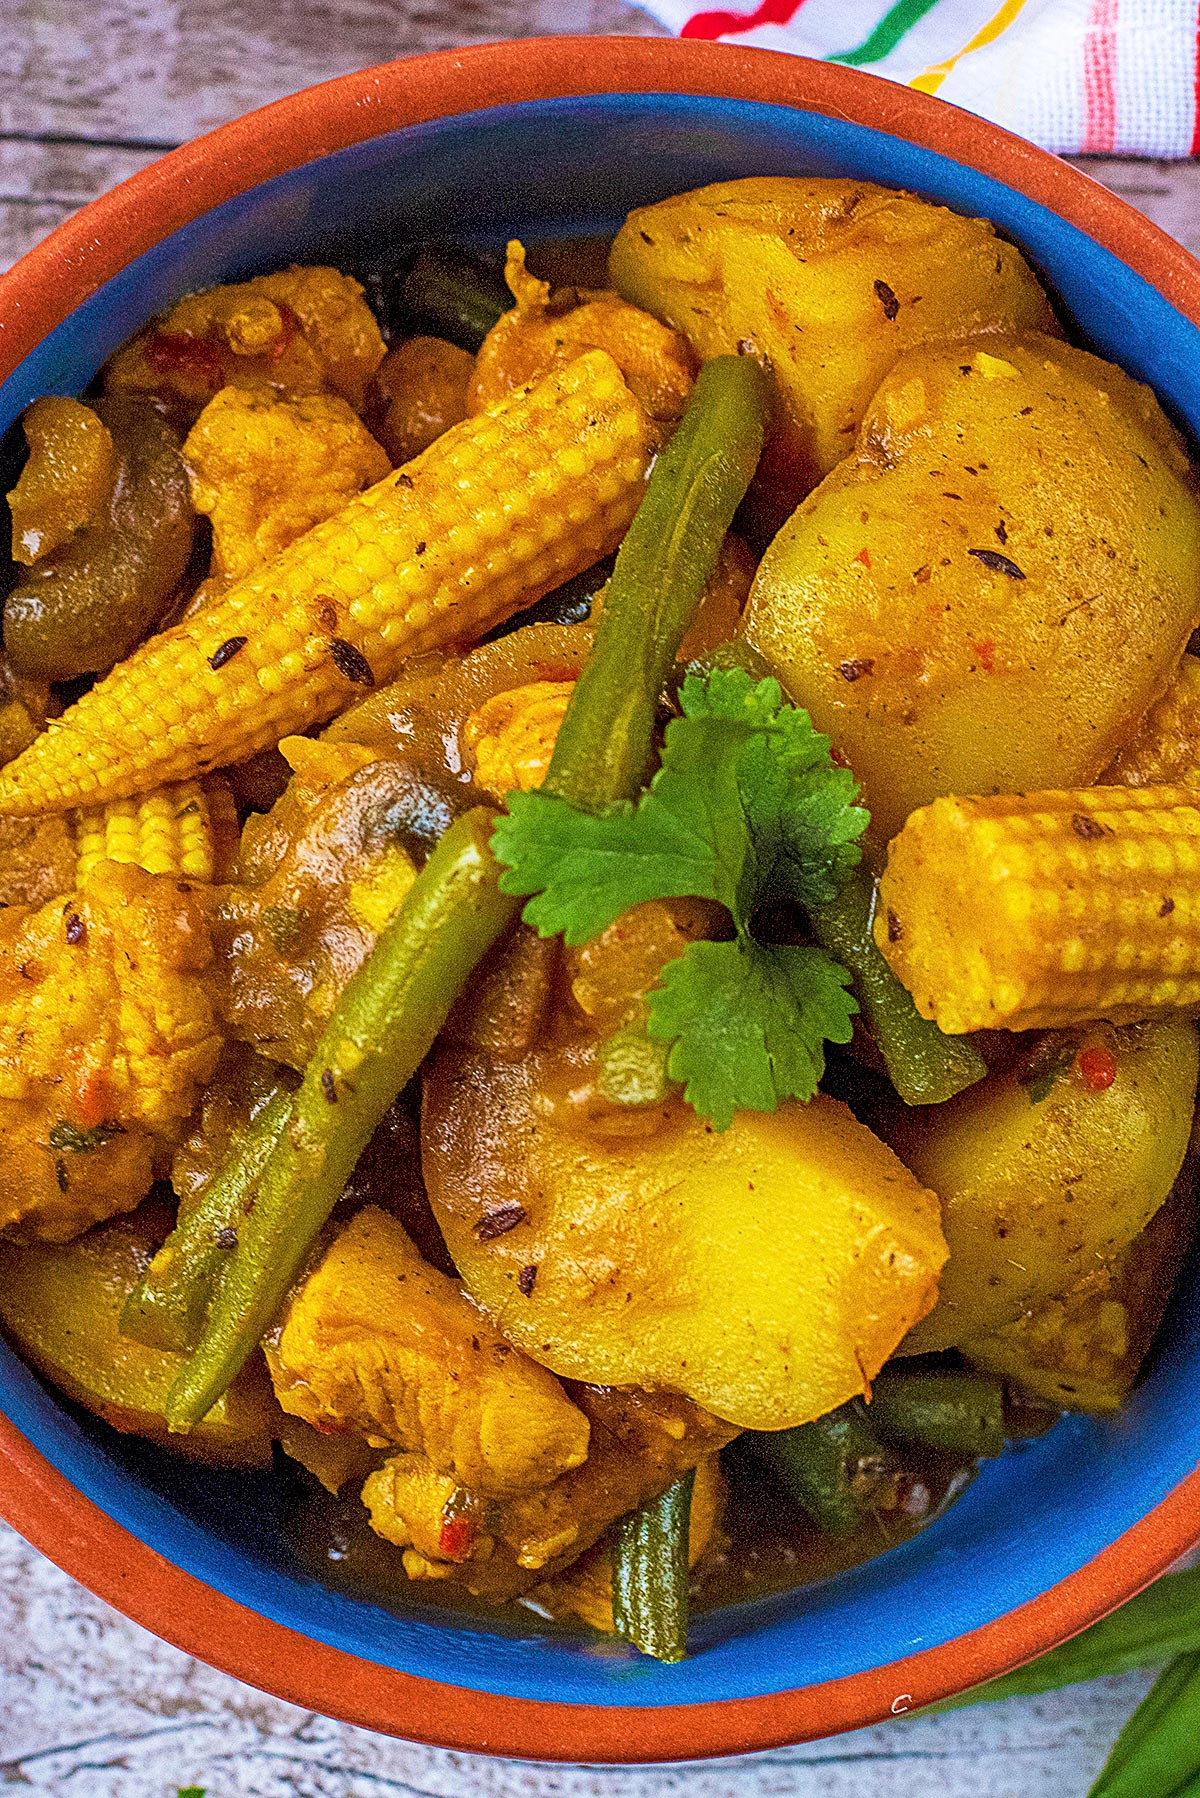 Vegetable curry in a blue and red dish